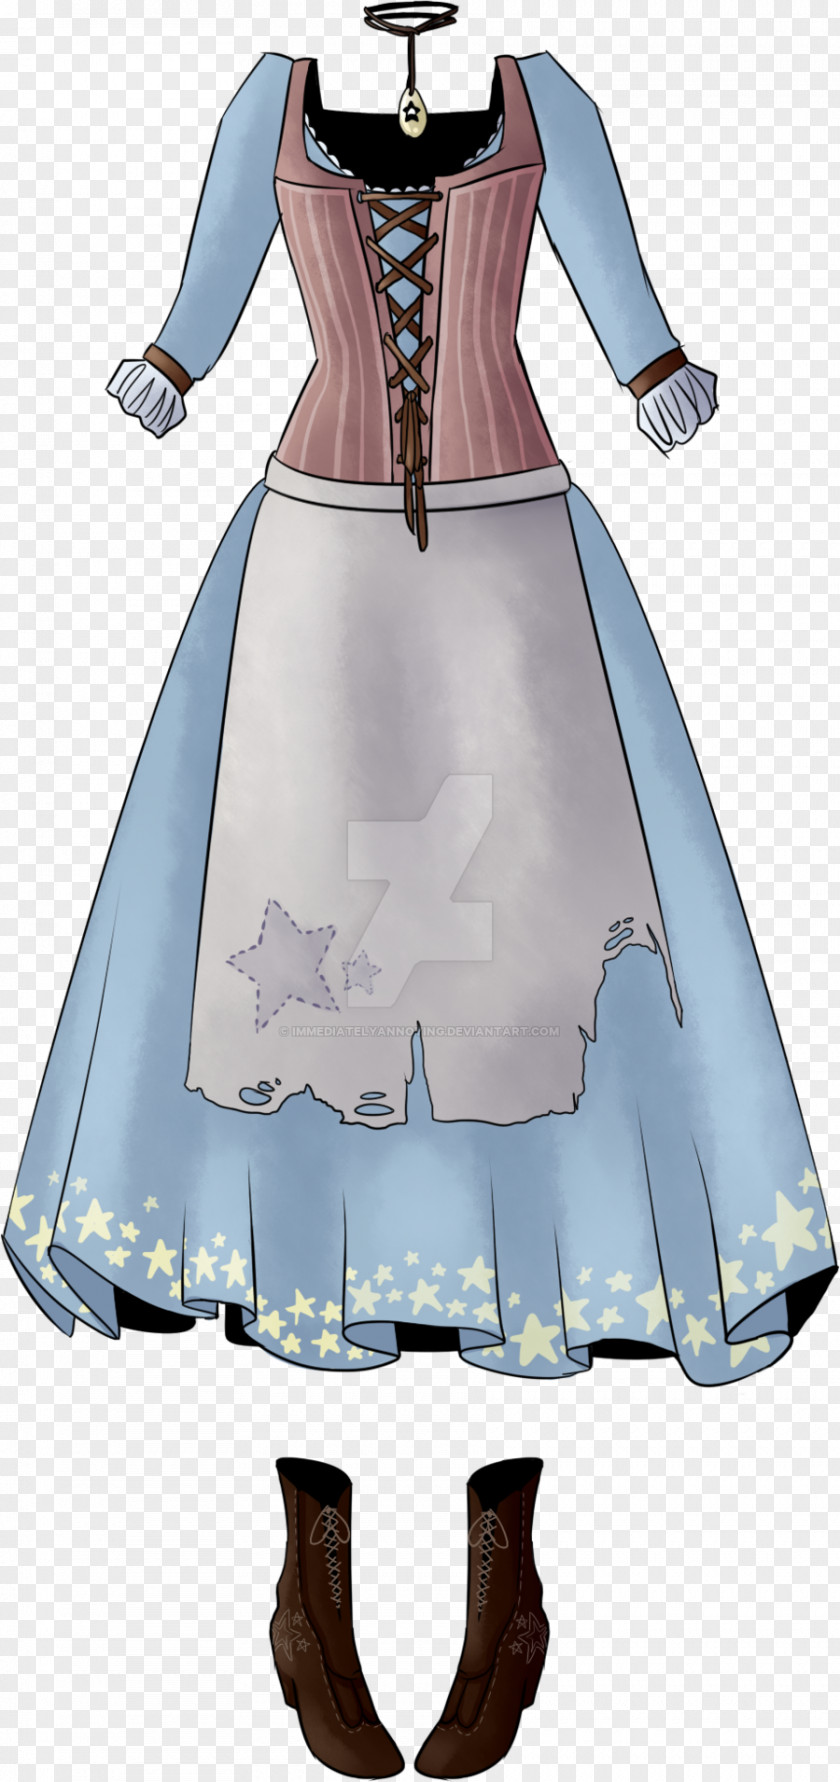 Peasant Gown Fashion Costume Design Art Dress PNG